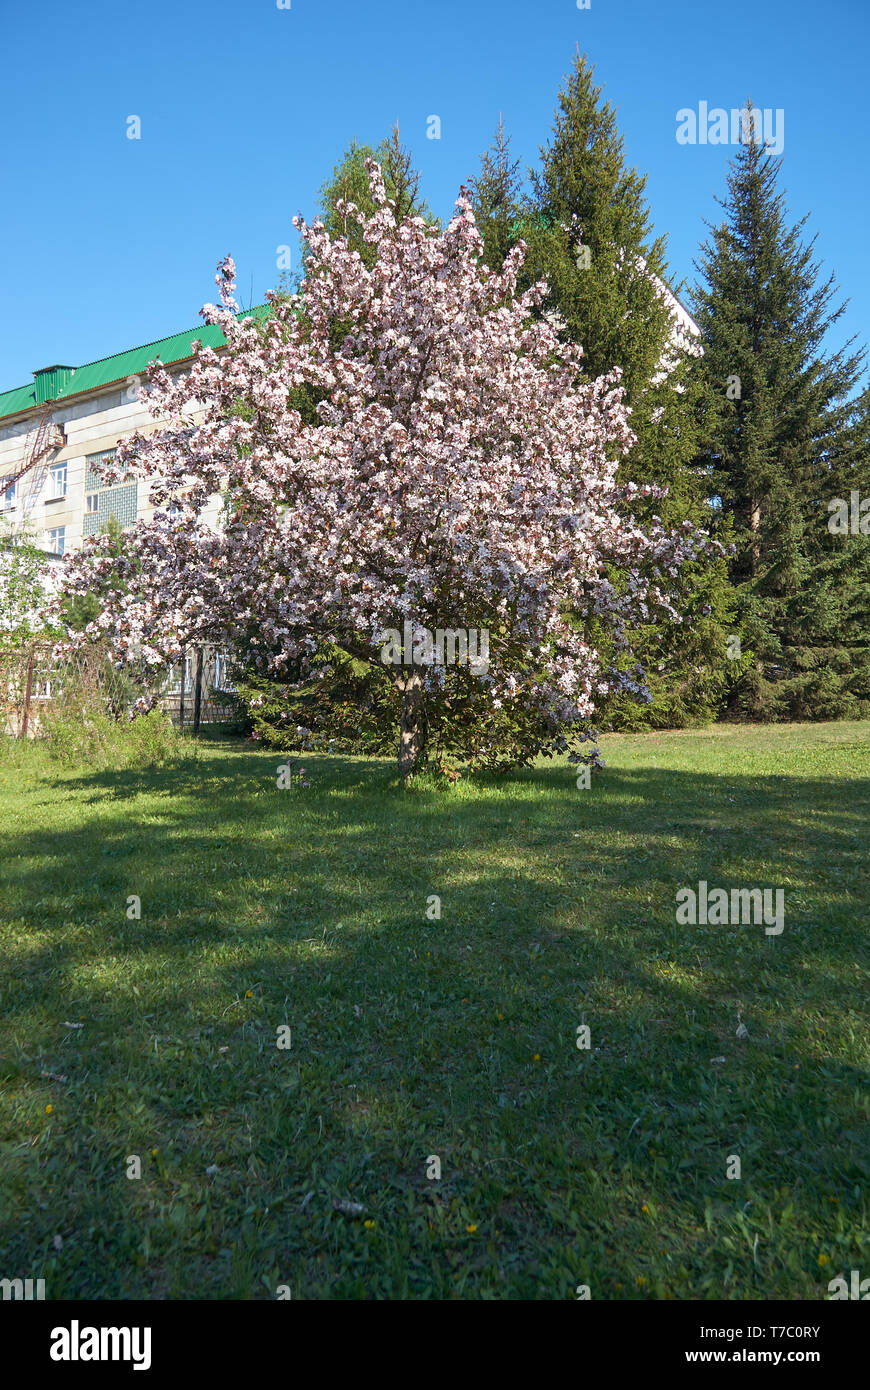 Shot of blooming apple tree crown with pink flowers.  Institute of Cytology and Genetics building on the background Stock Photo